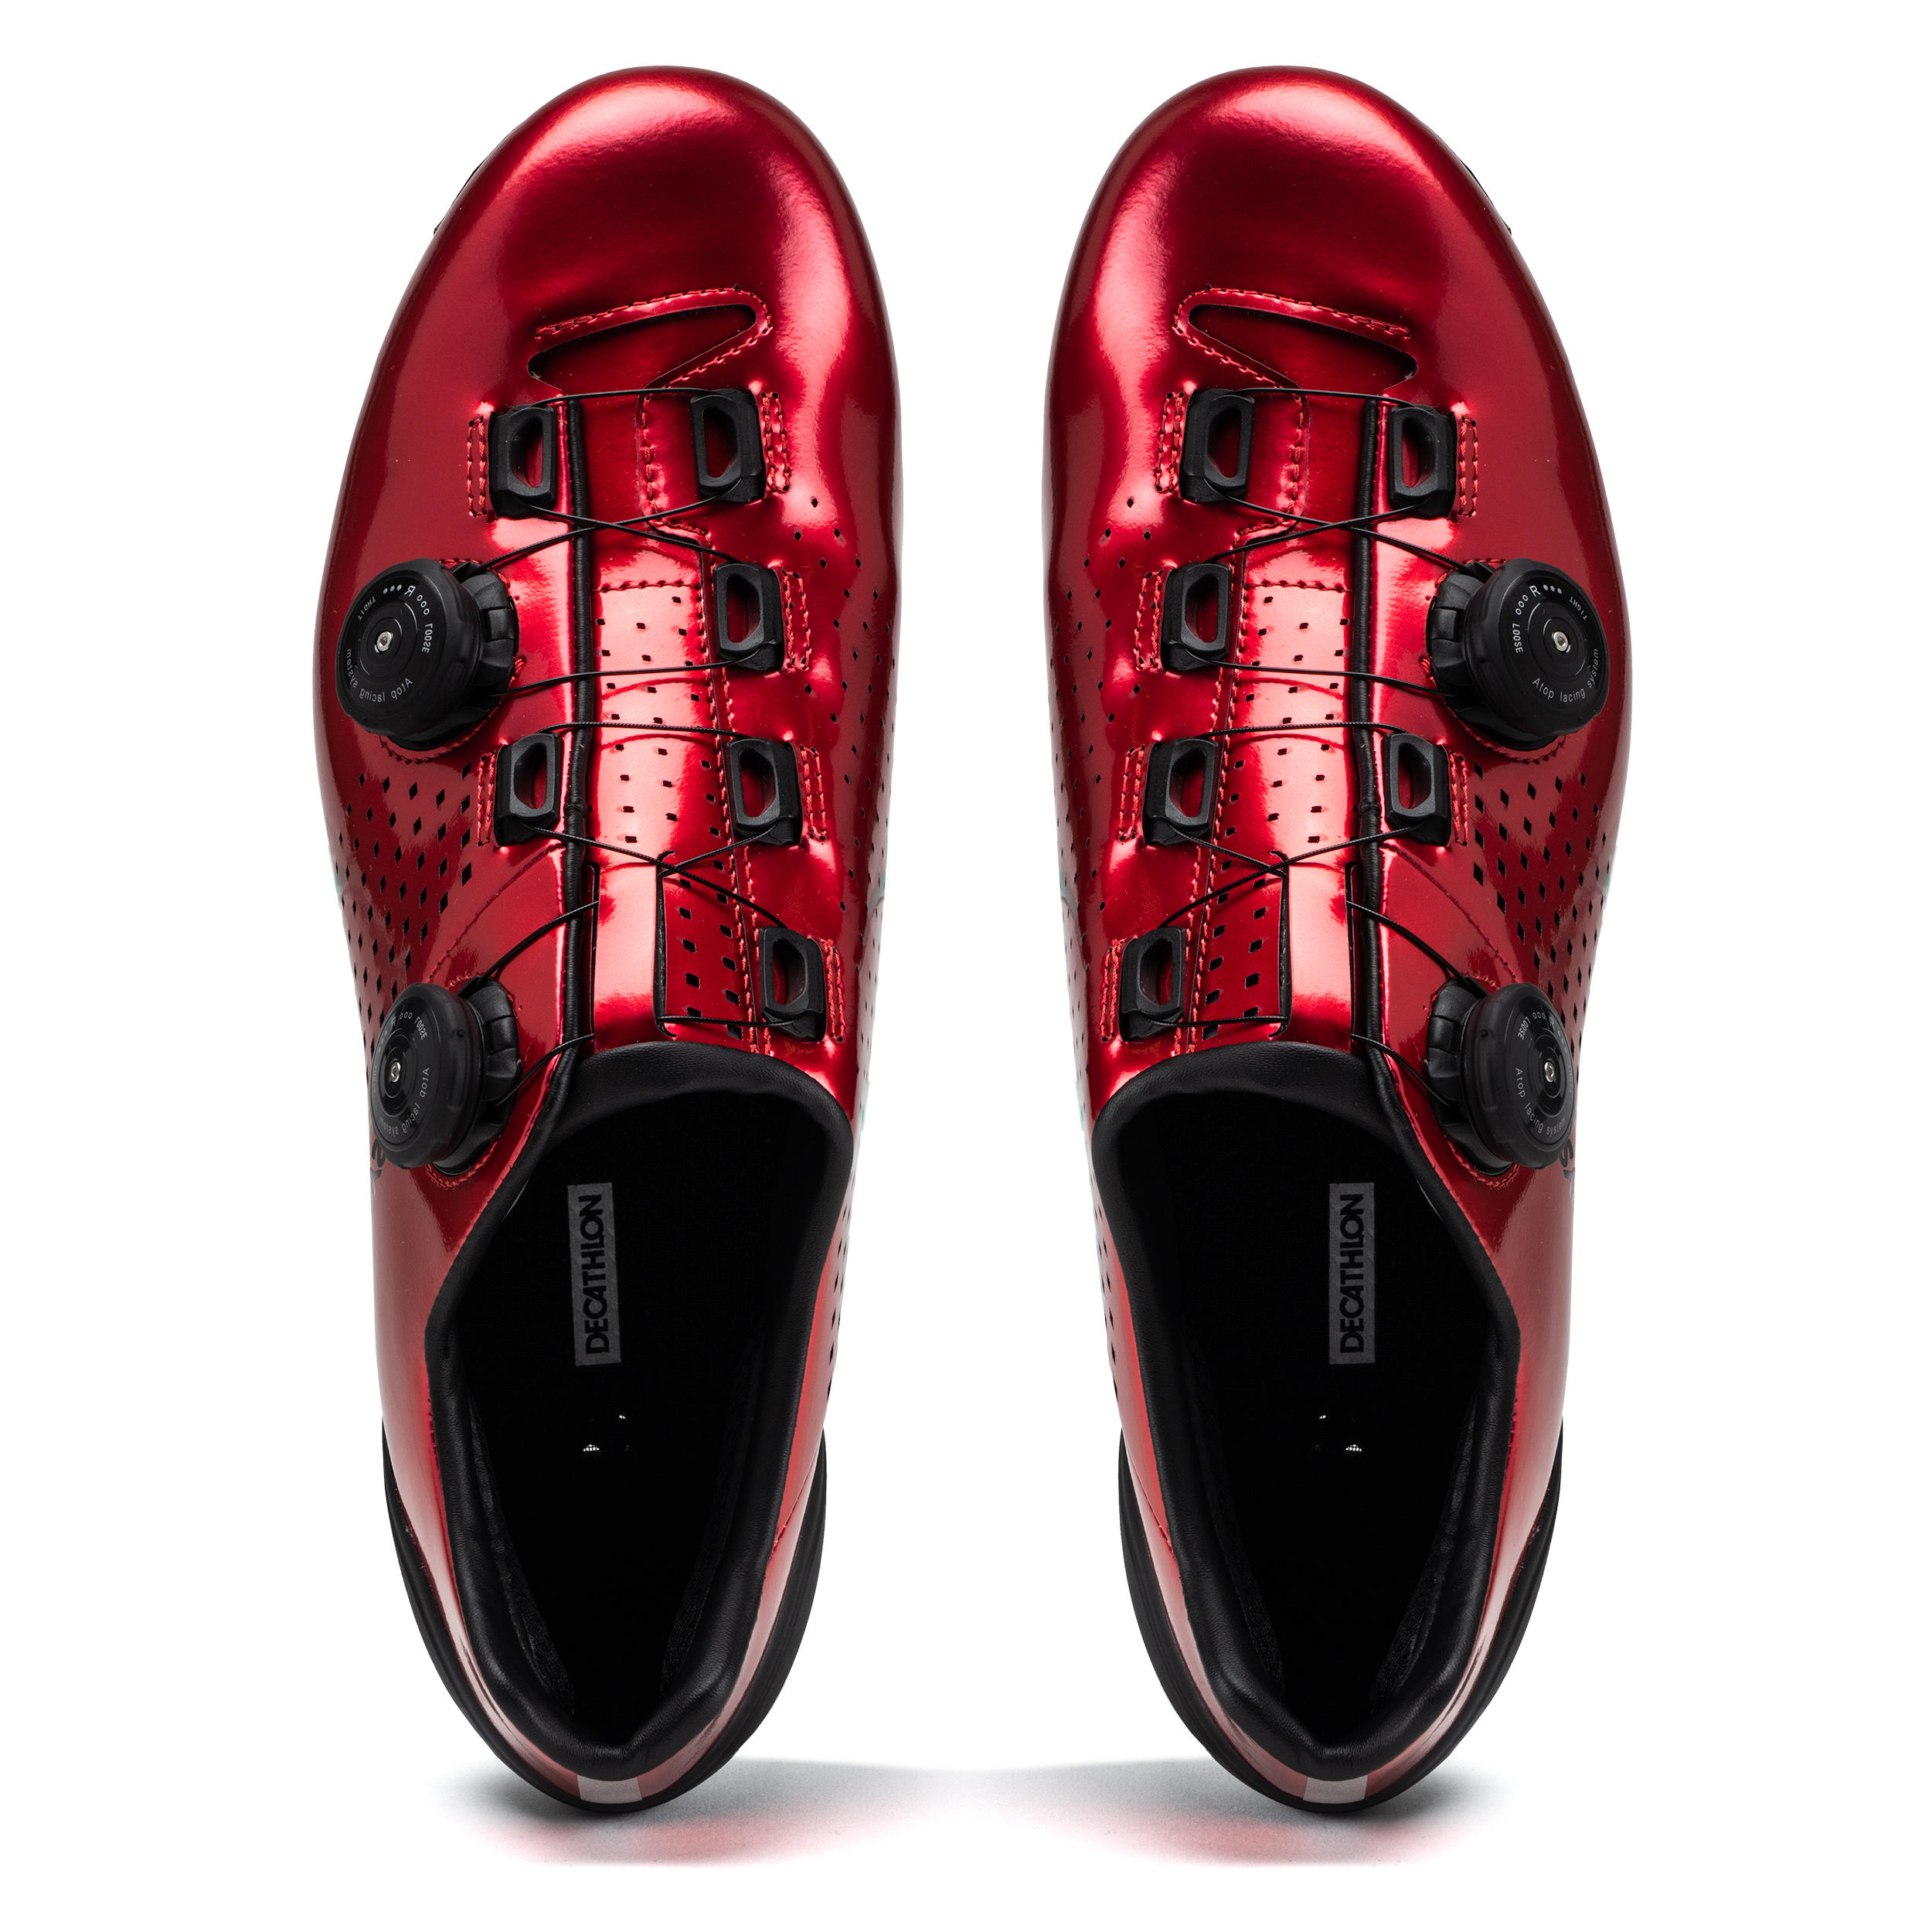 RoadR 900 Full Carbon Road Cycling Shoe - Red 5/6